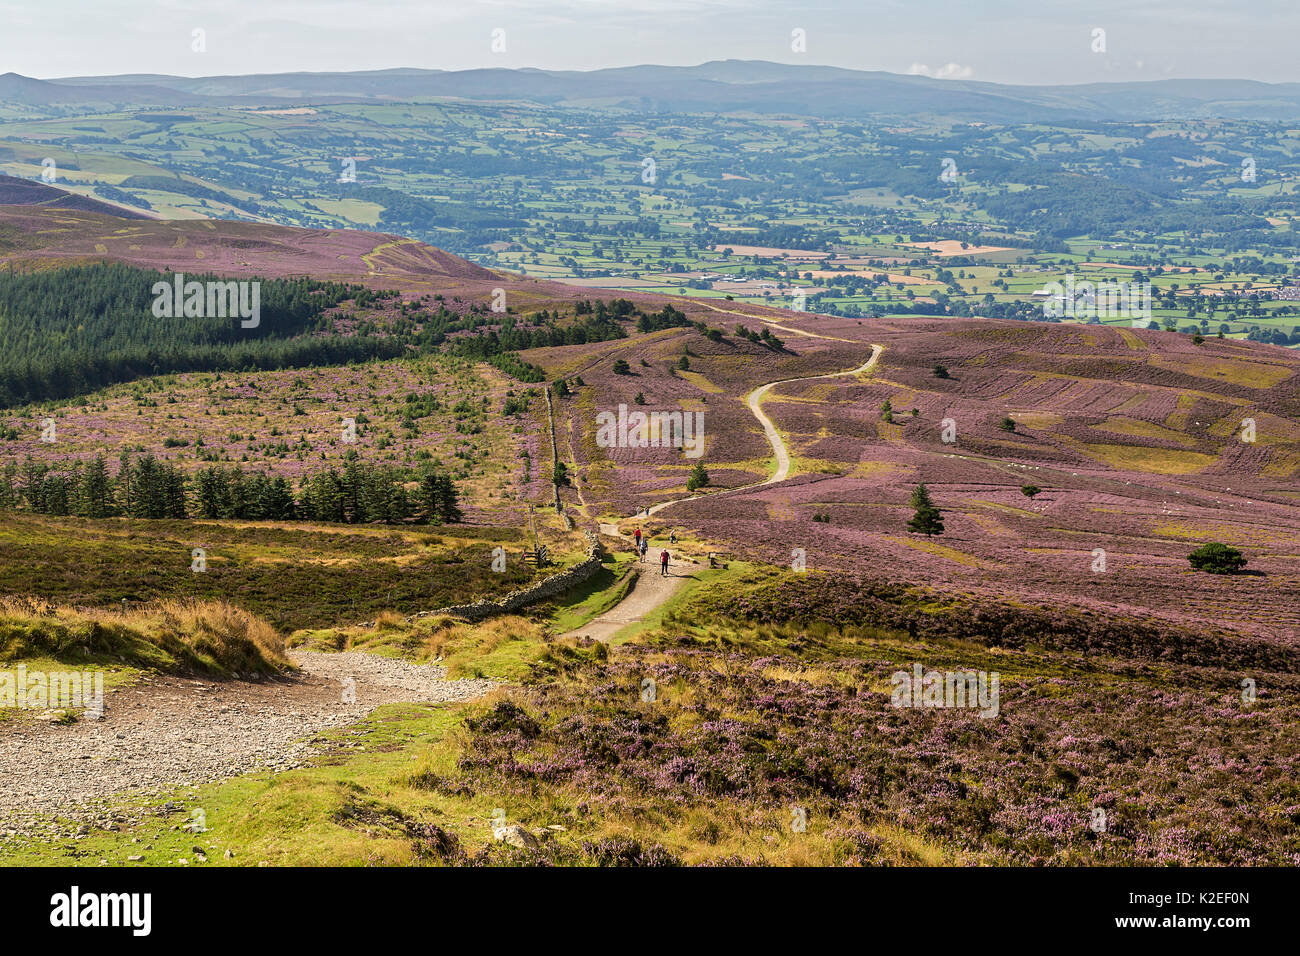 Offa's Dyke path viewed from the summit of Moel Famau in the Clwydian Mountain Range with the Vale of Clwyd in the distance, North Wales, UK, August. Stock Photo